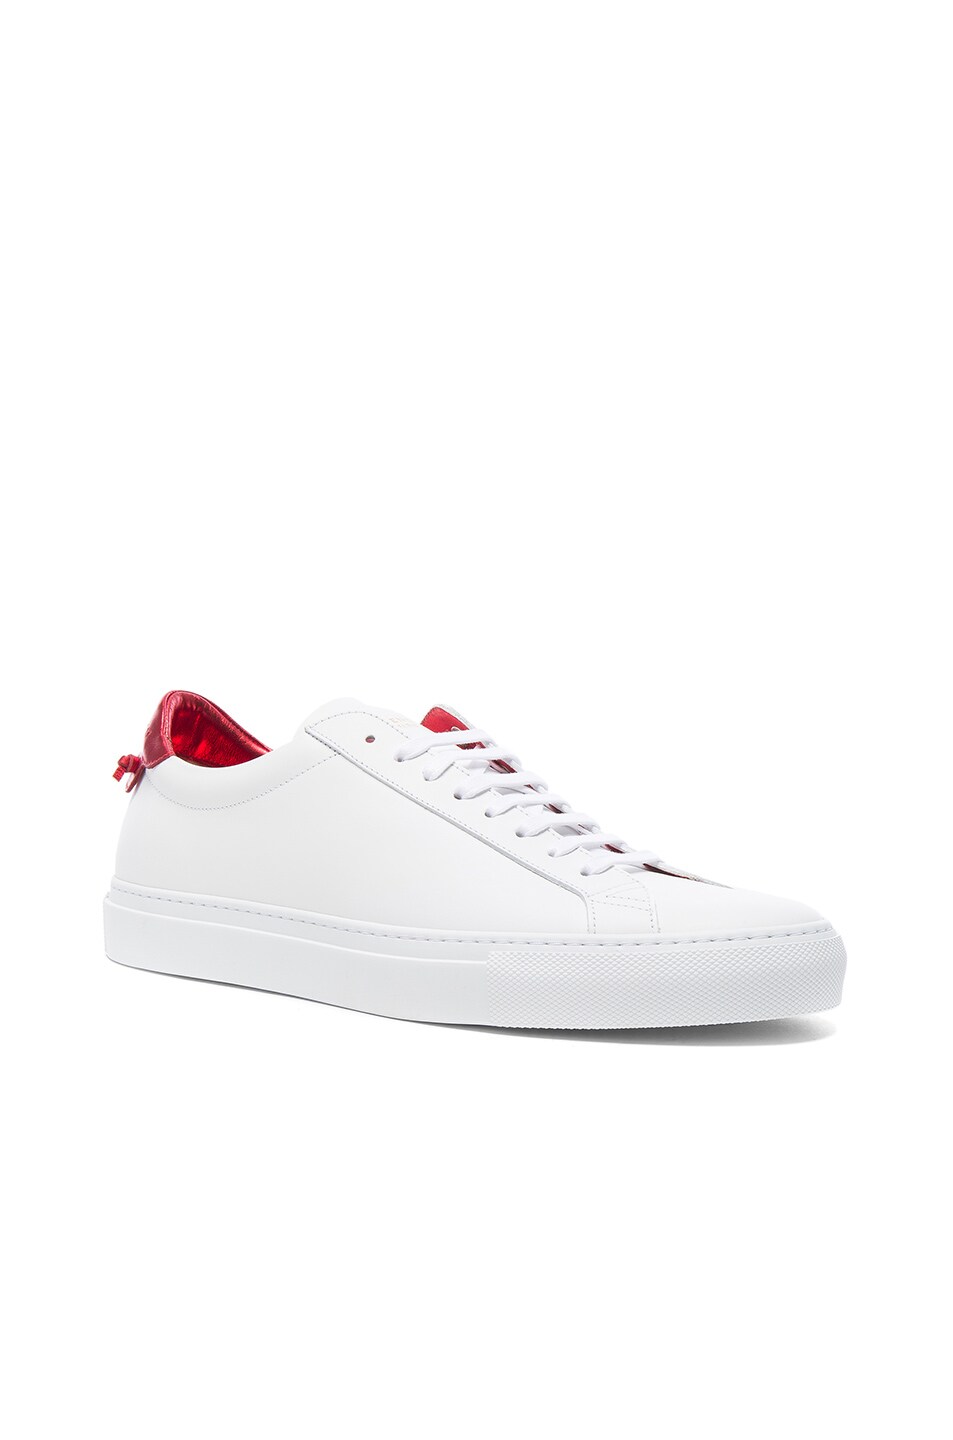 Image 1 of Givenchy Leather Urban Street Low Top Sneakers in White & Red